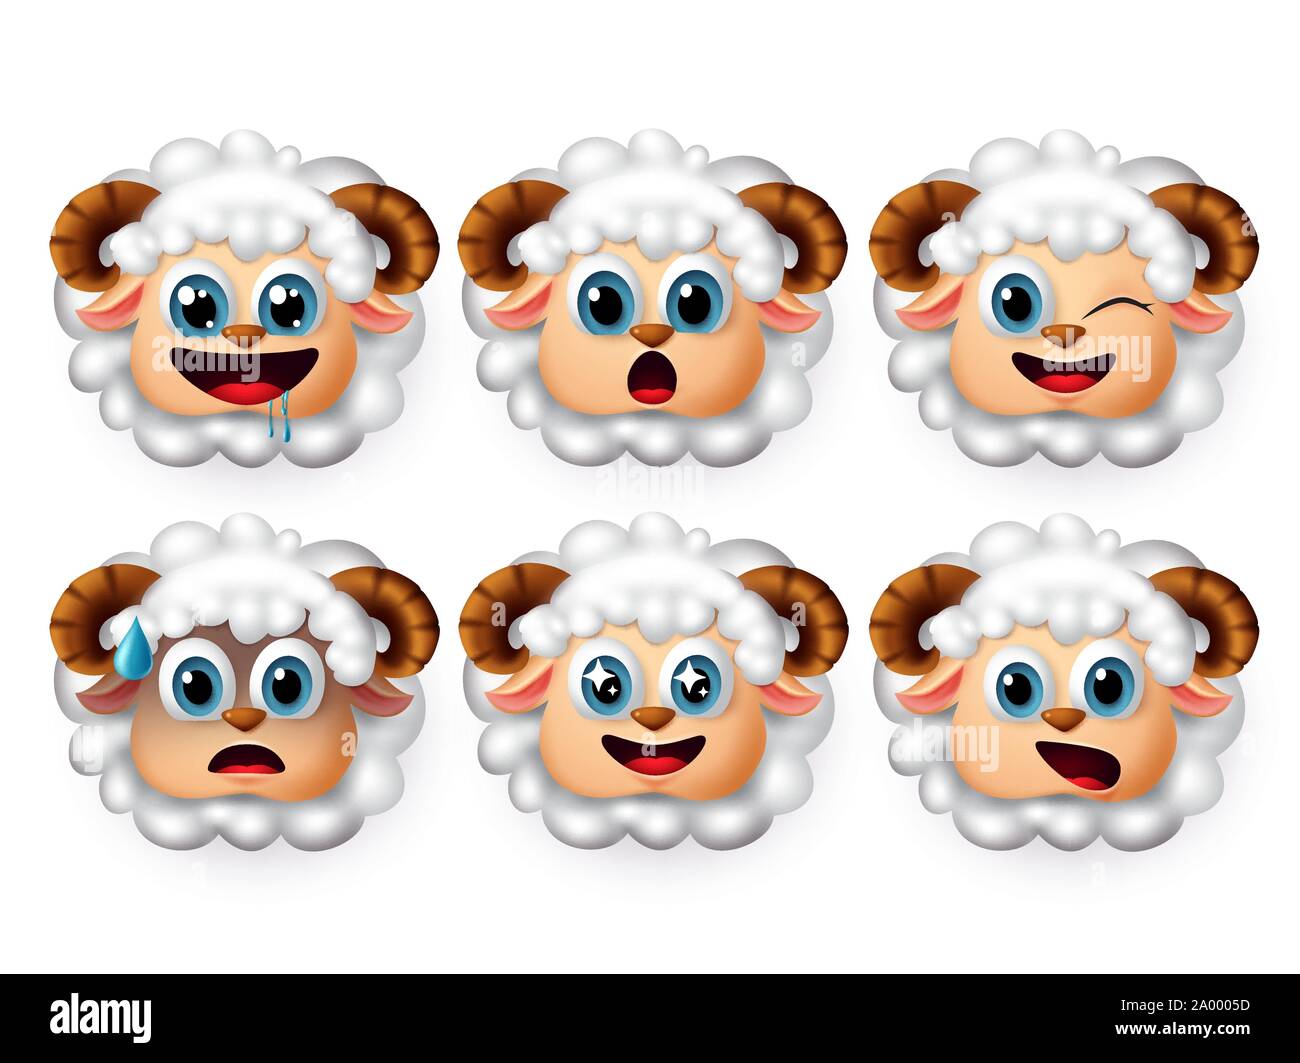 Lamb sheep emoji vector set. Cute lamb emojis and sheep emoticon with facial expression of hungry and surprise isolated in white background. Stock Vector